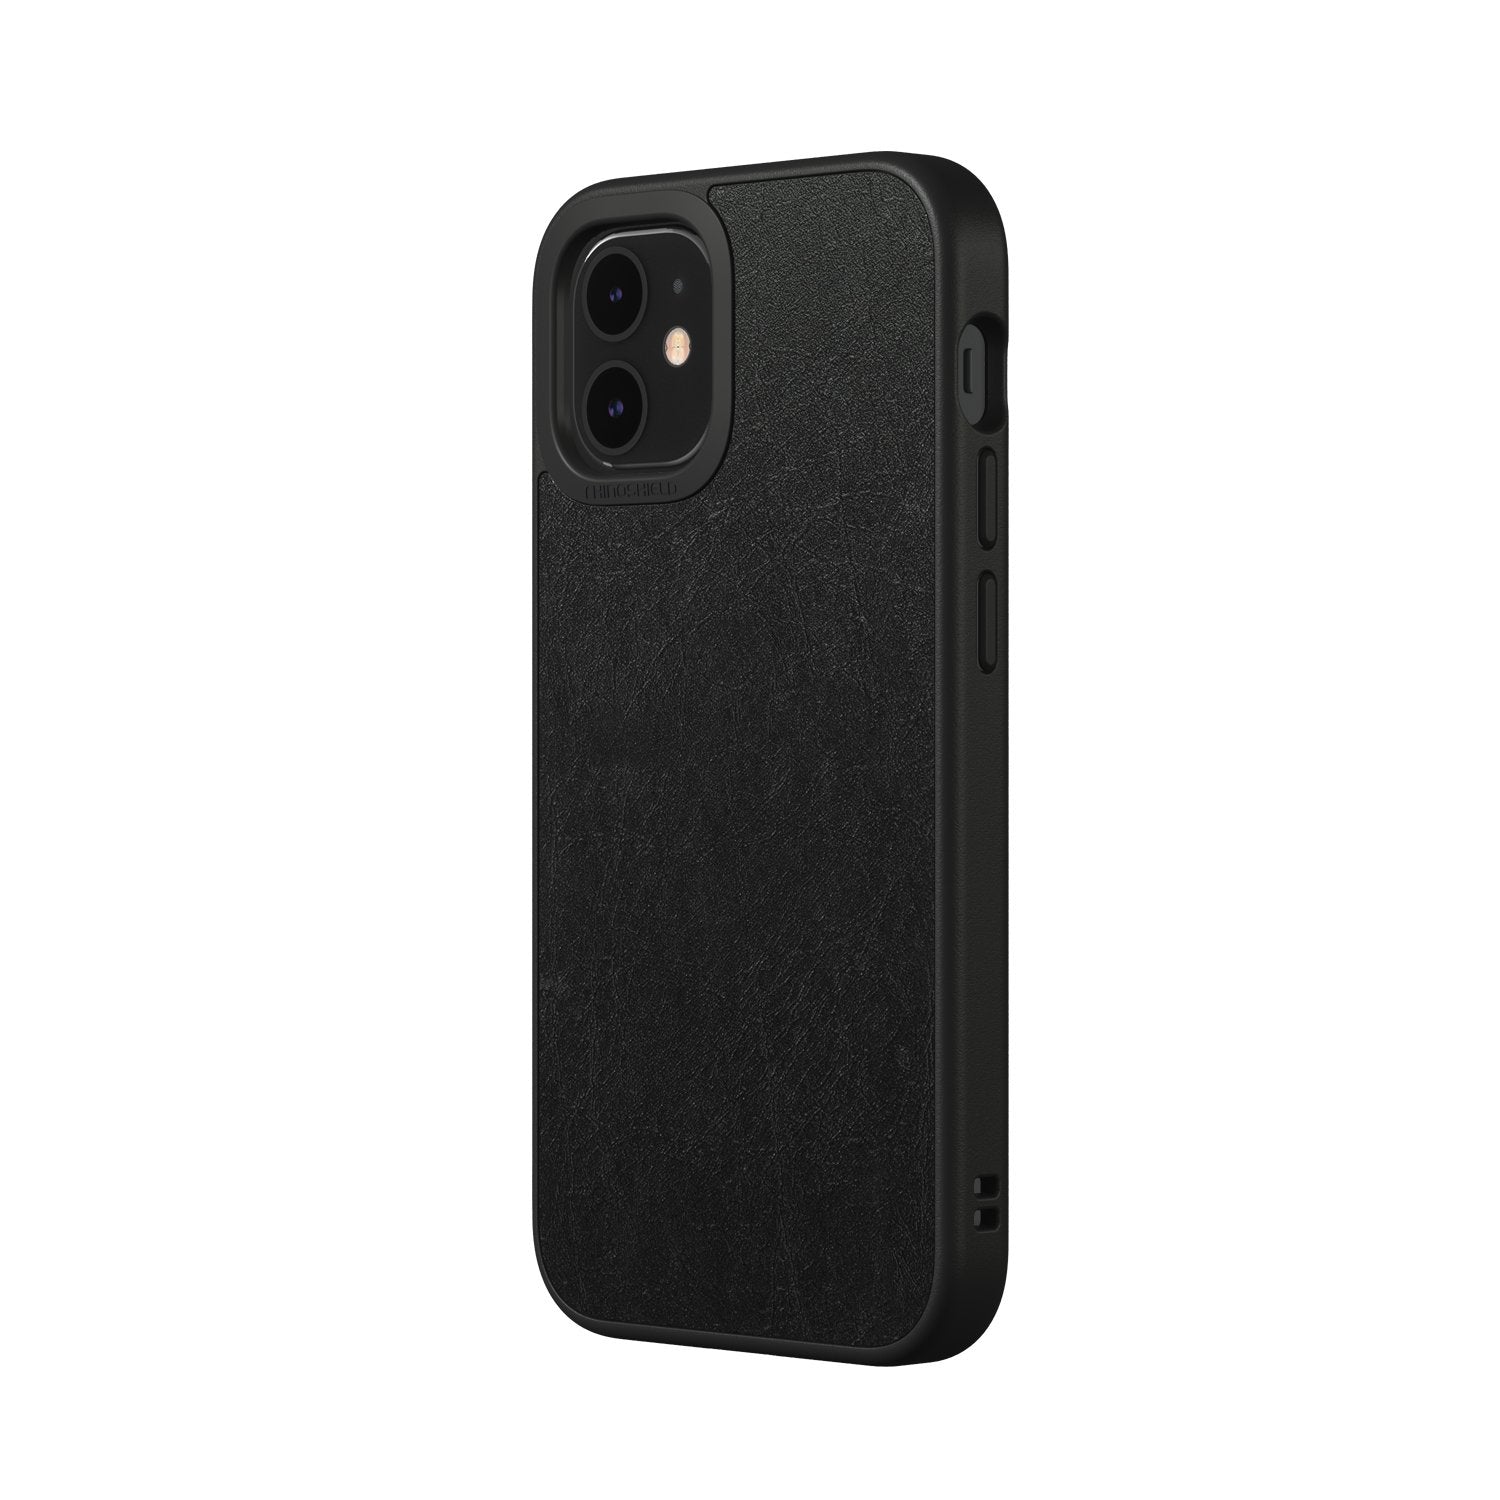 SwitchEasy MagSkin Case for iPhone 12 Pro Max 